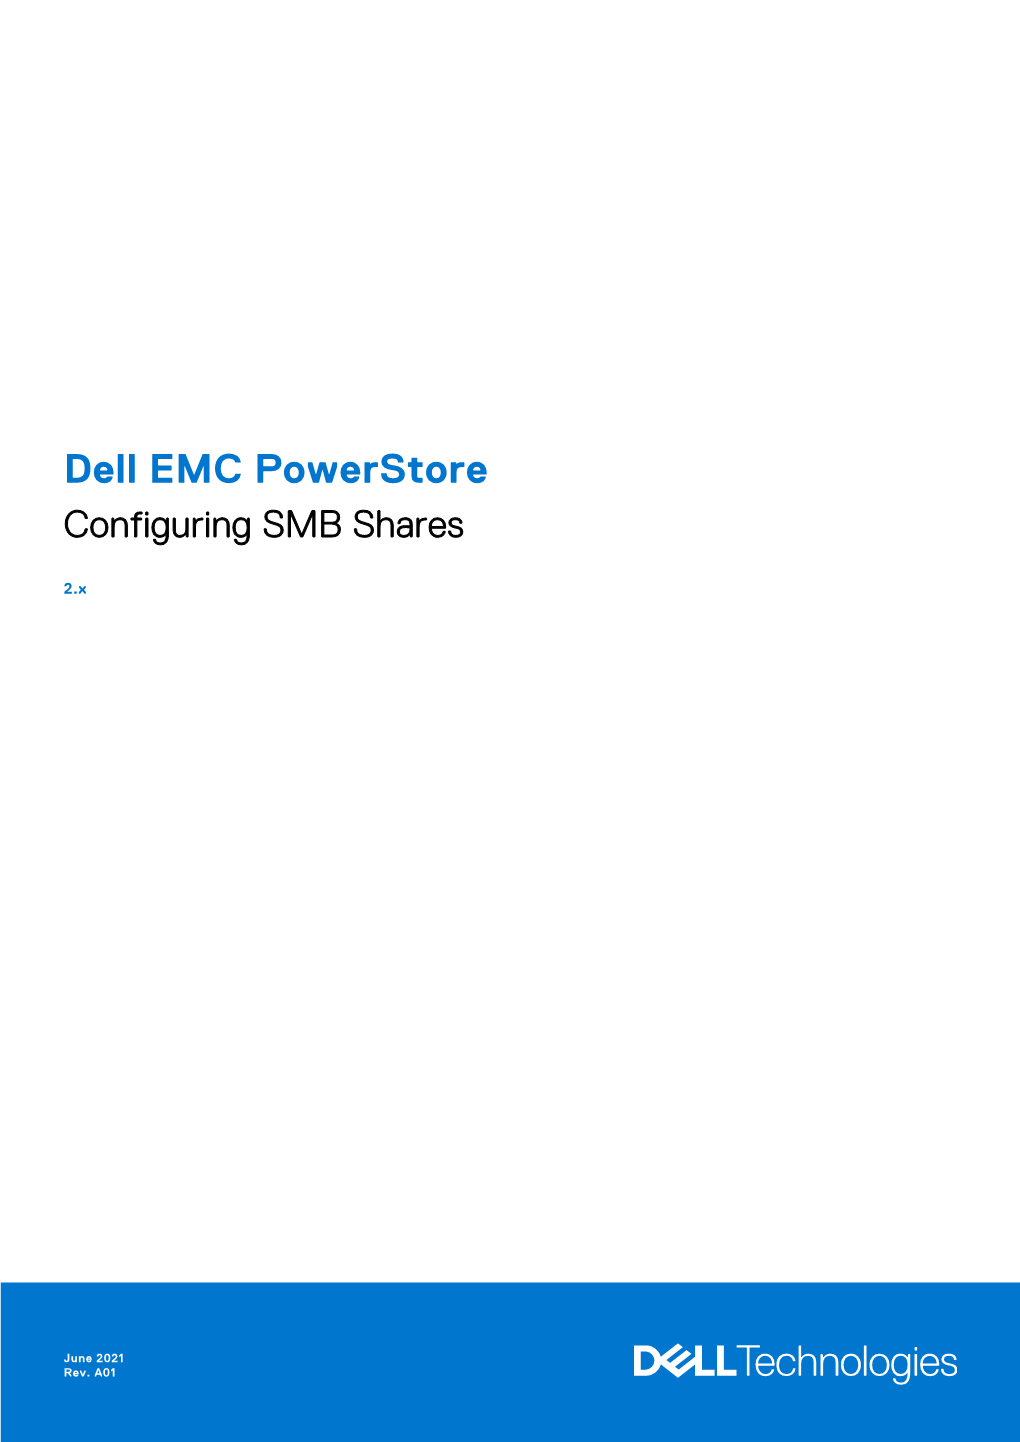 Dell EMC Powerstore Configuring SMB Shares